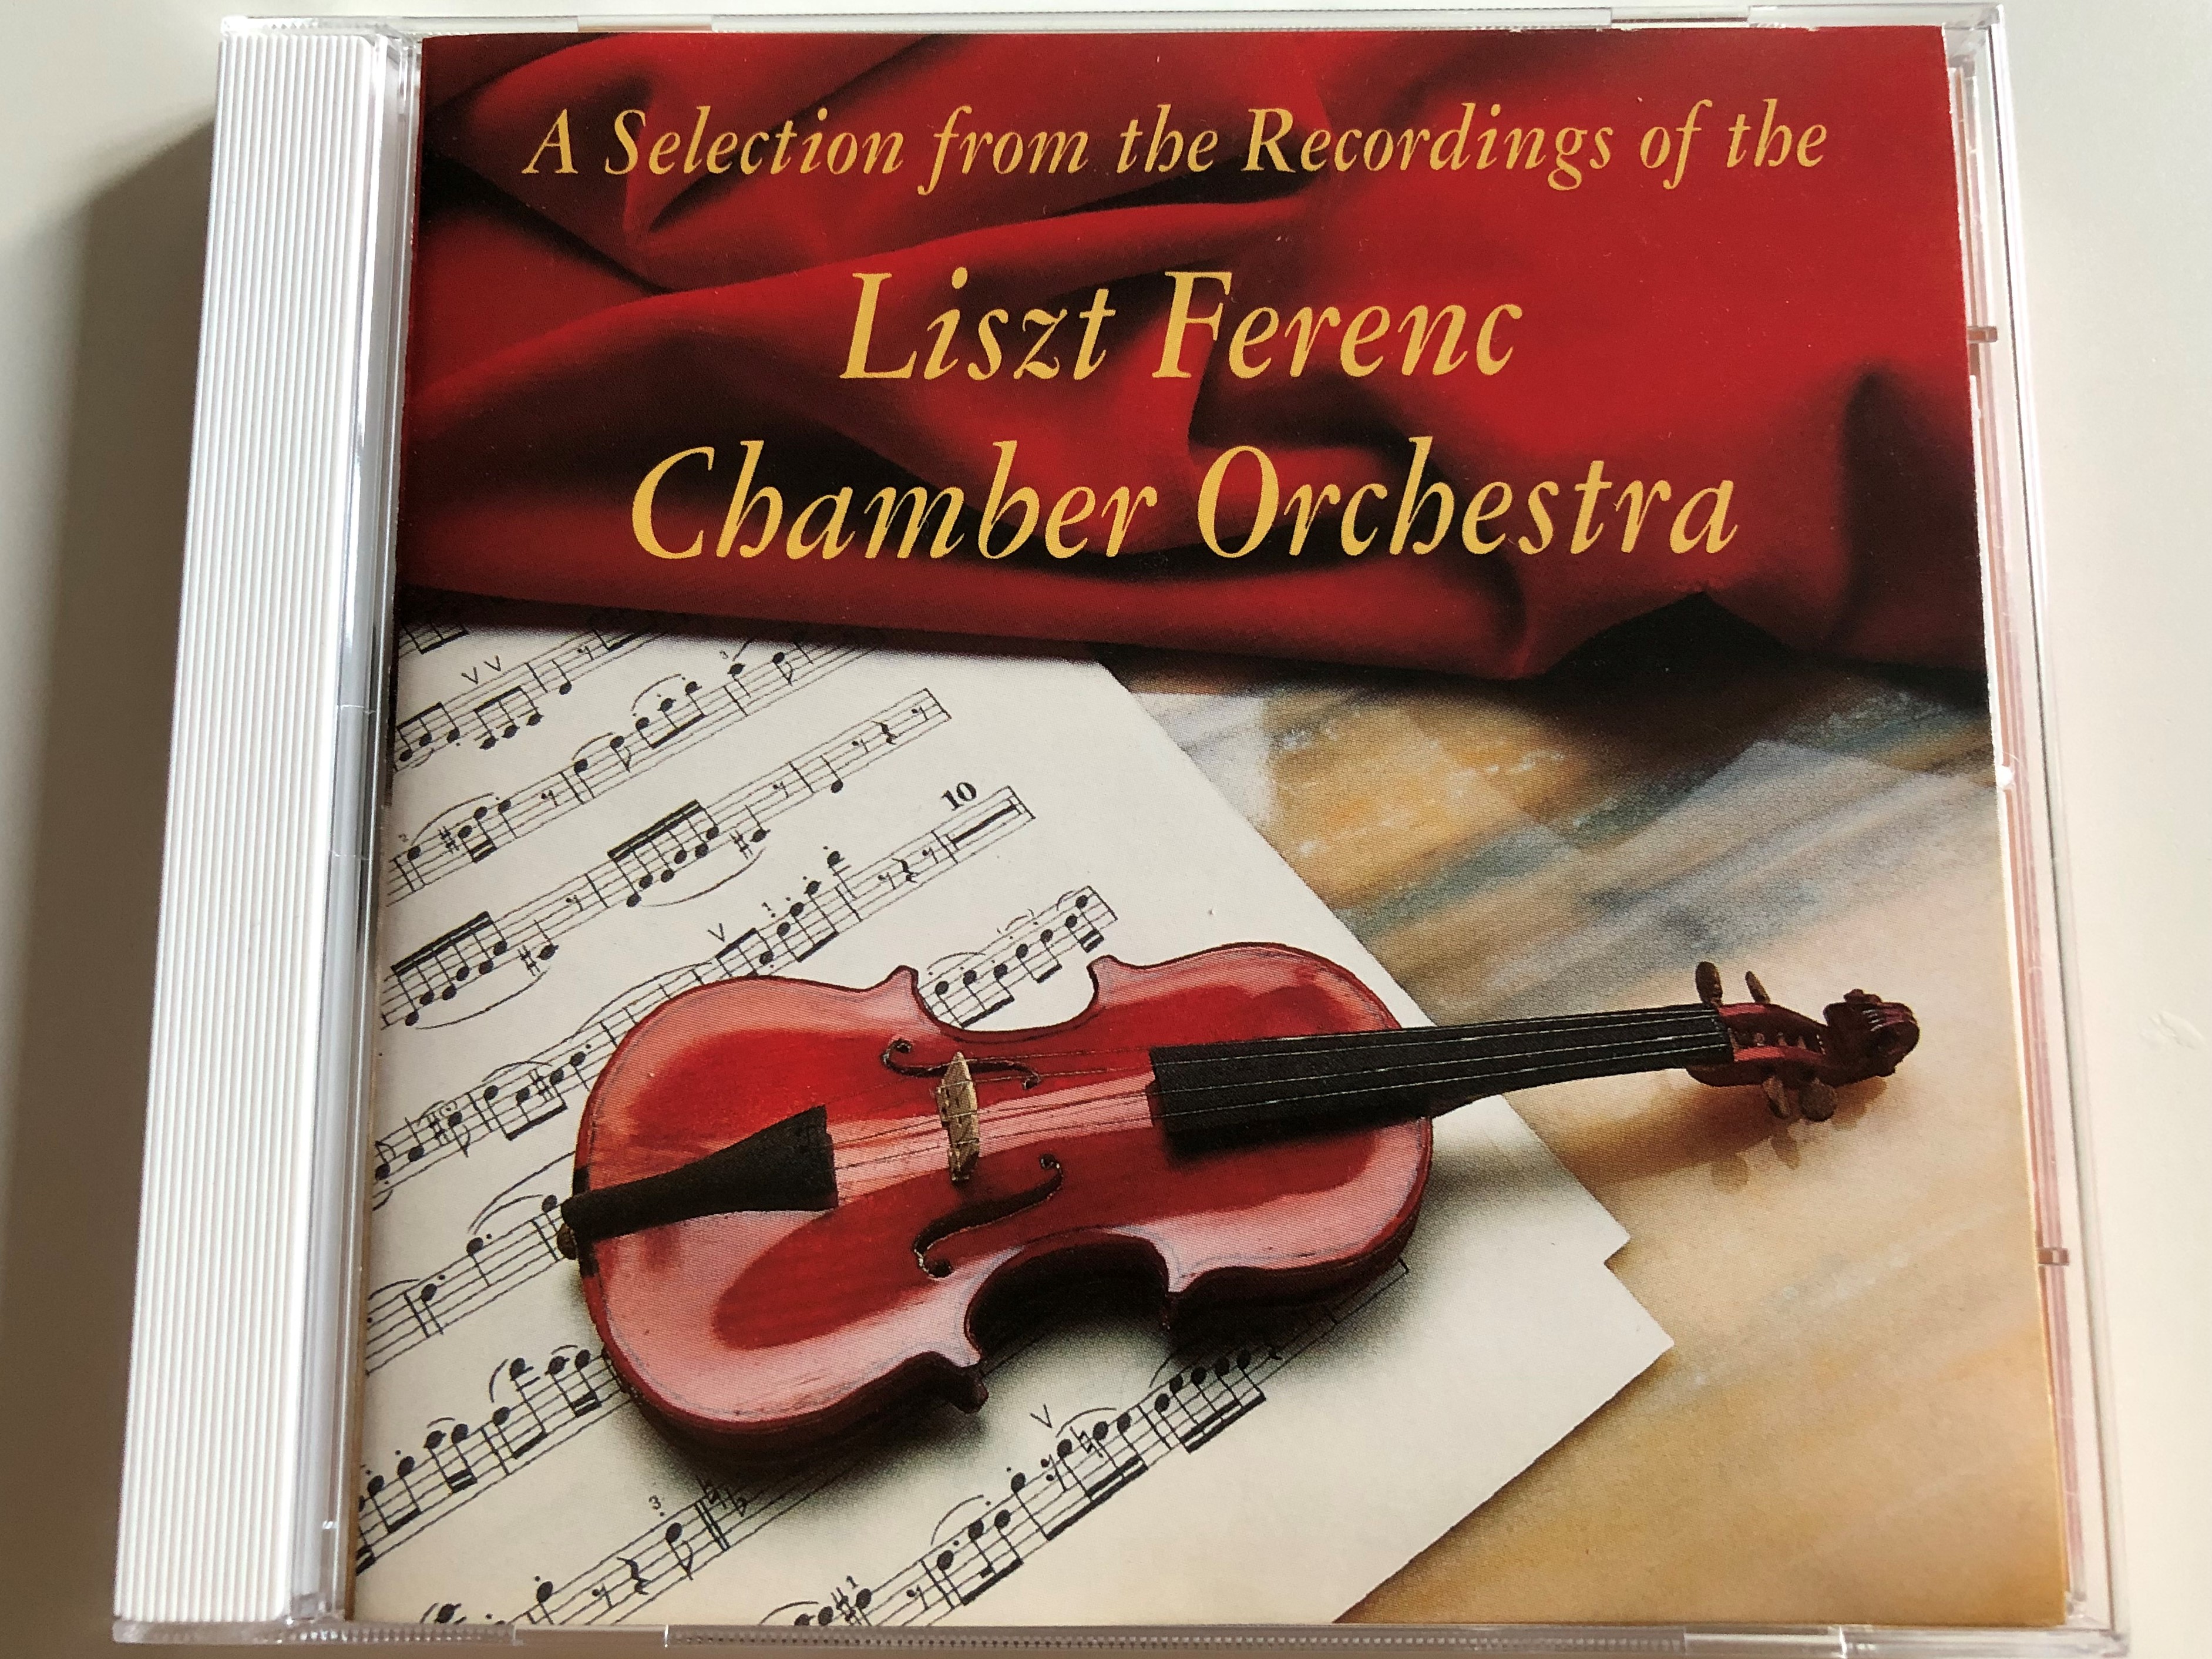 liszt-ferenc-chamber-orchestra-selection-from-the-recordings-lead-by-j-nos-rolla-mkb-0003-audio-cd-1993-1-.jpg